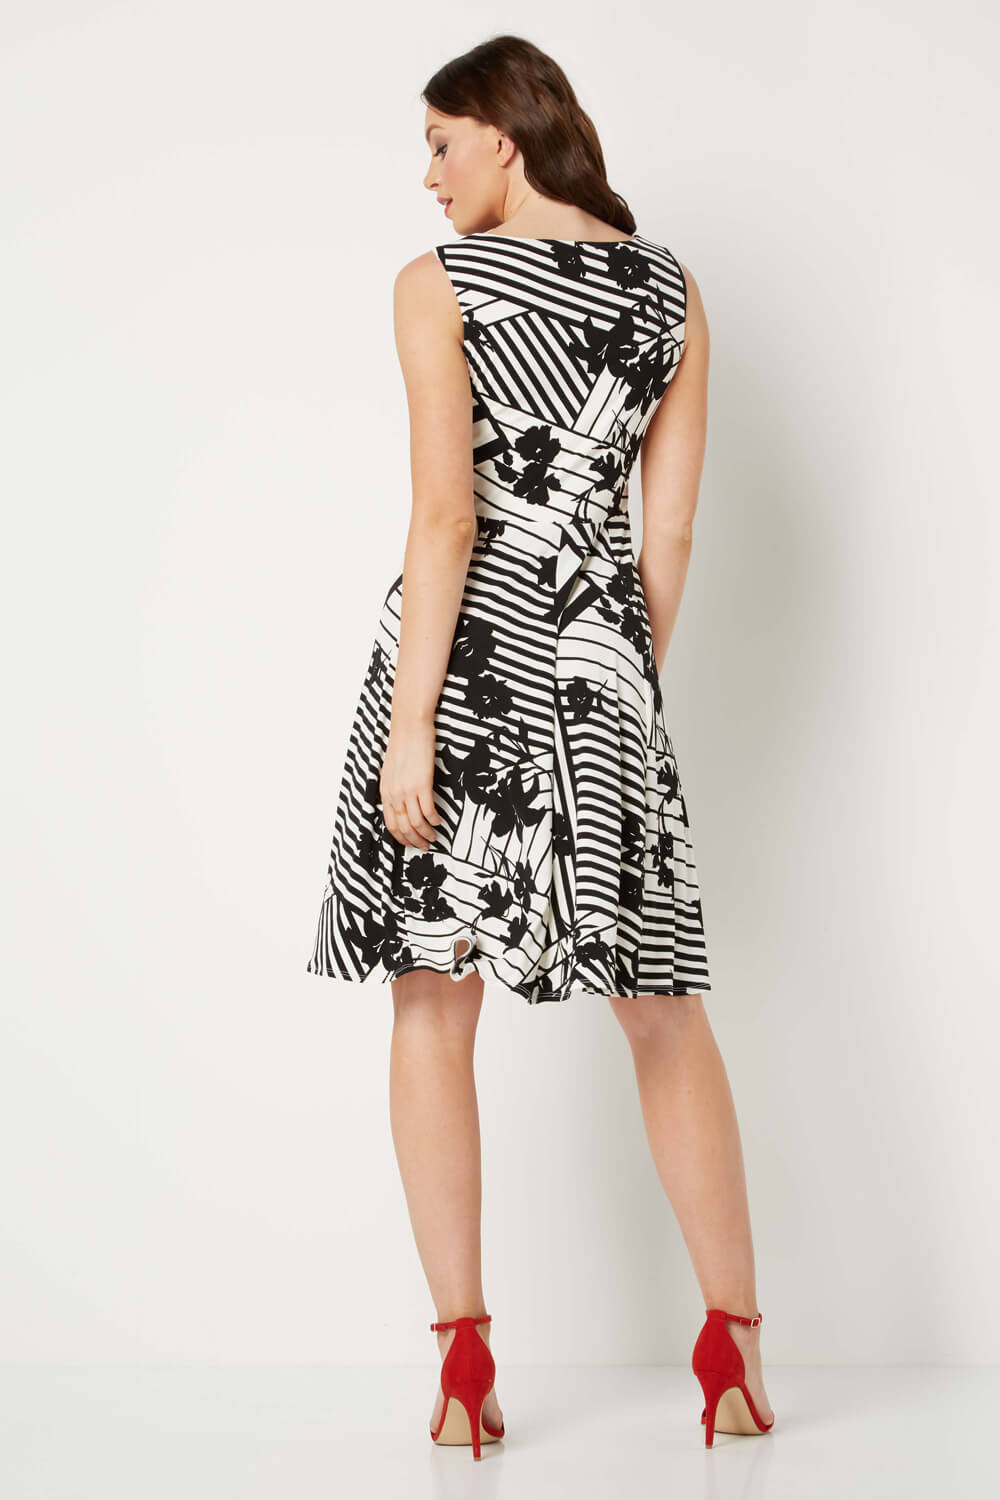 Black Monochrome Print Fit and Flare Dress, Image 2 of 3